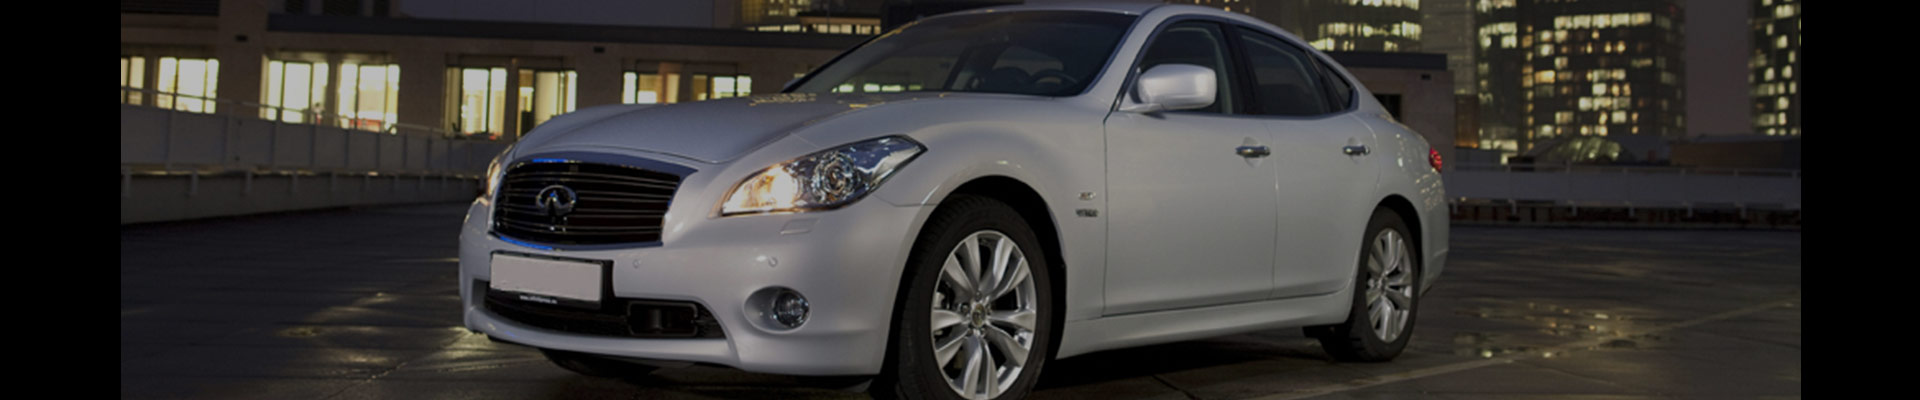 Shop Replacement and OEM 2013 Infiniti M35h Parts with Discounted Price on the Net